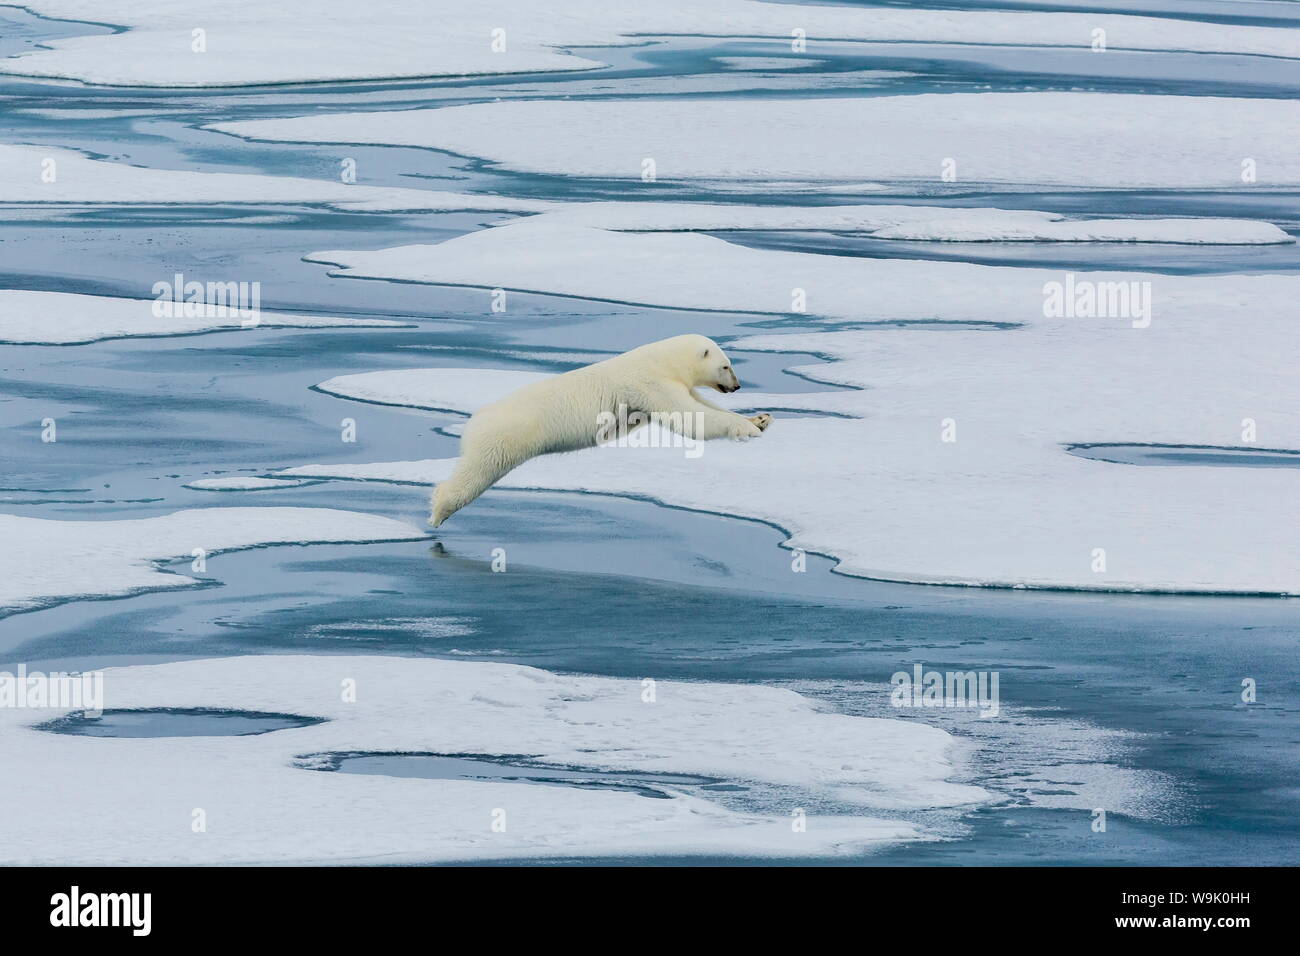 A mother polar bear (Ursus maritimus) leaping between floes in Lancaster Sound, Nunavut, Canada, North America Stock Photo